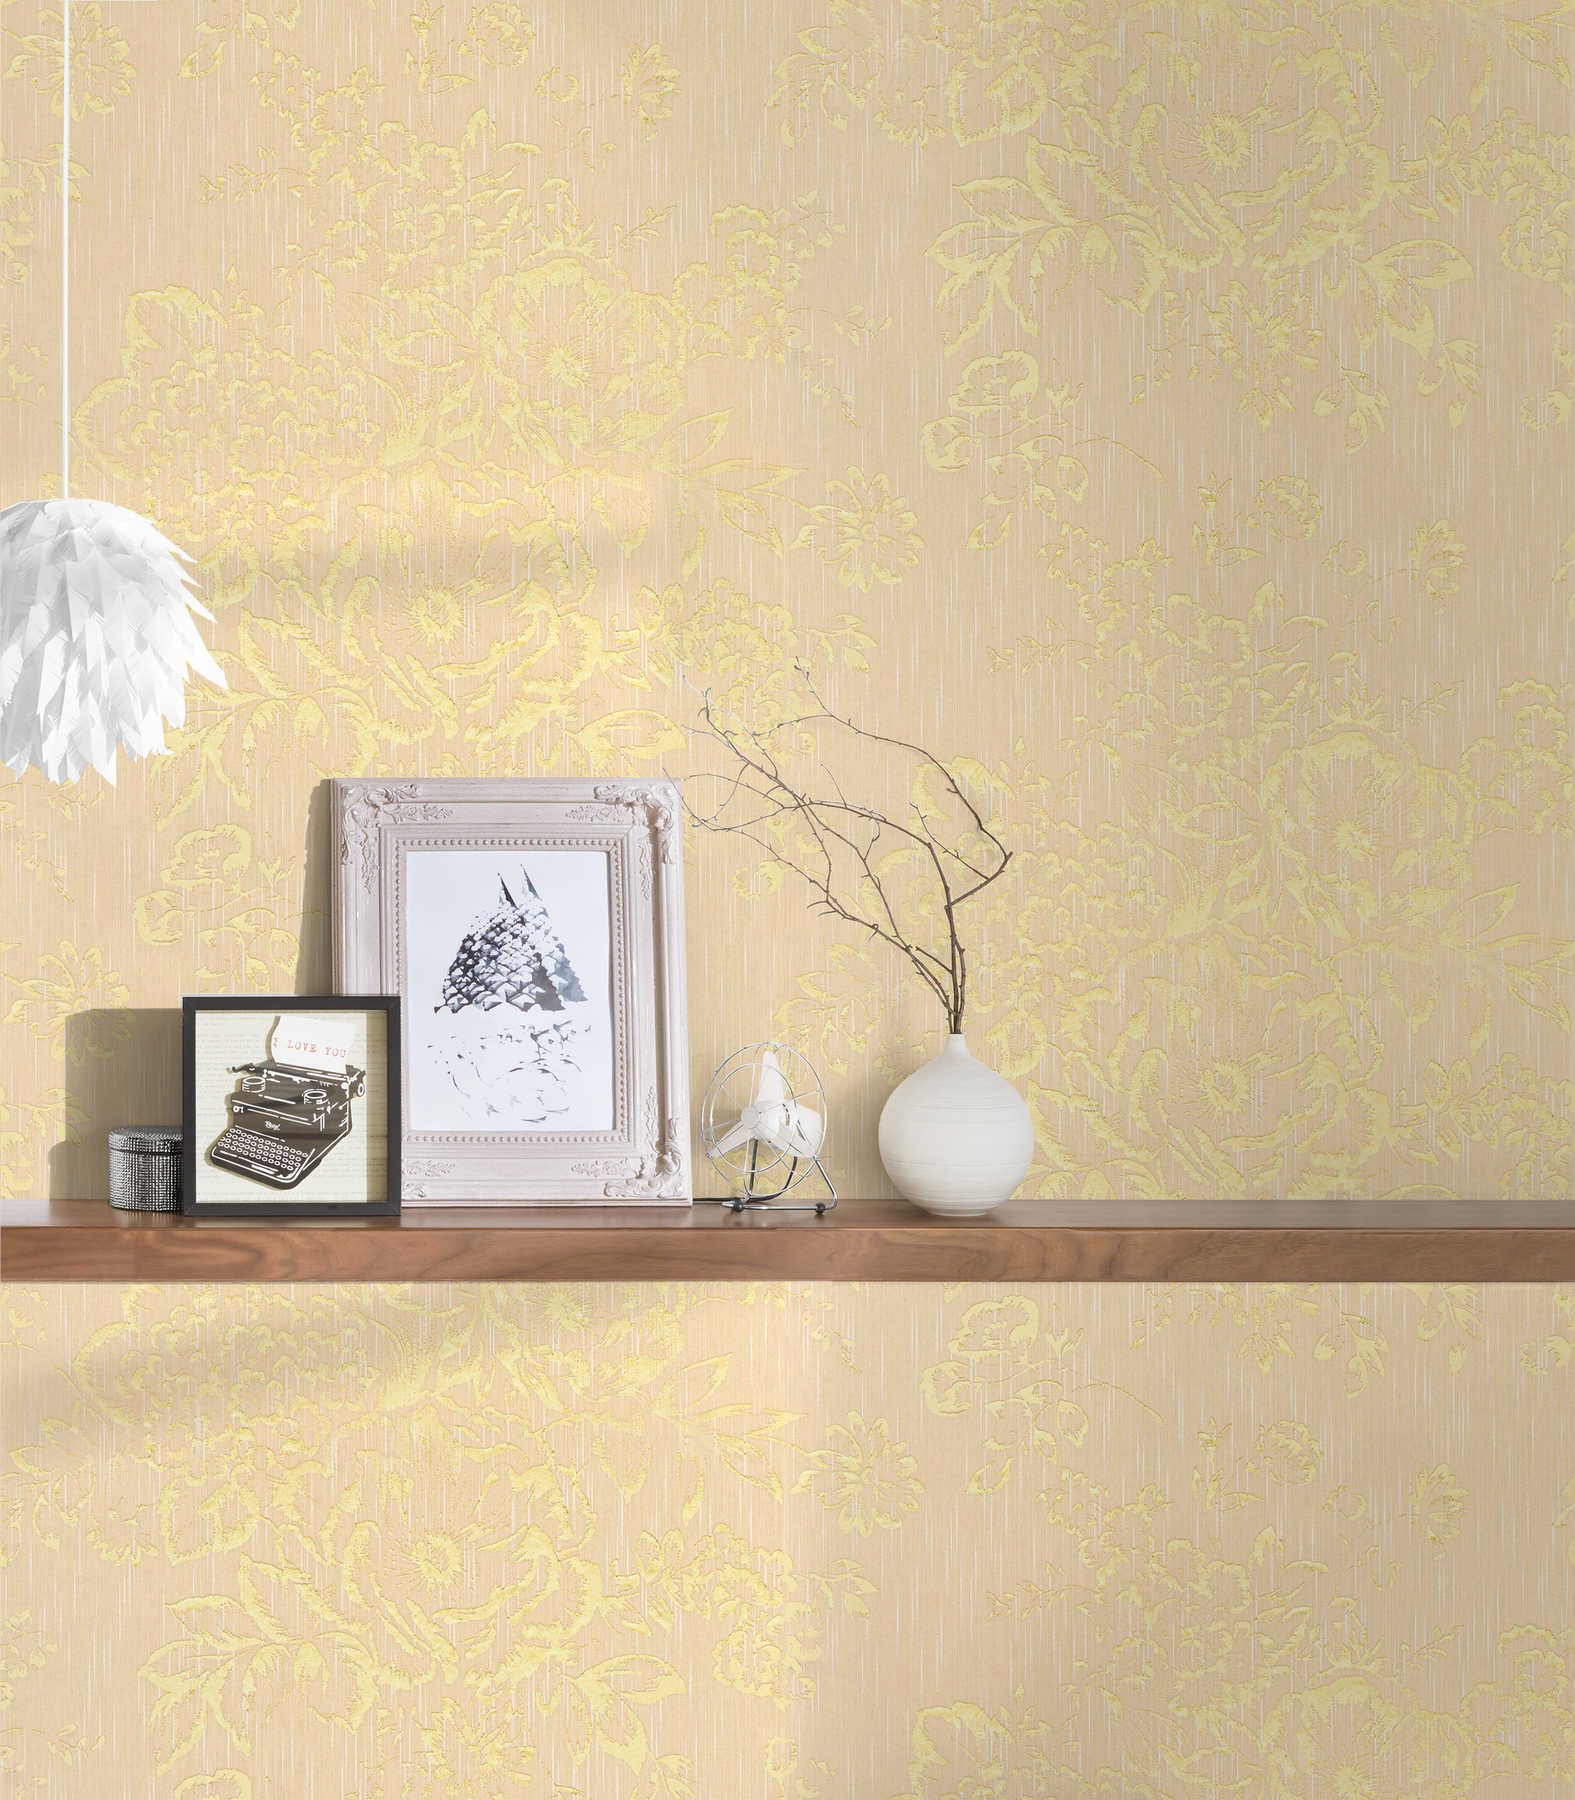             Textured wallpaper with gold floral pattern - gold, cream
        